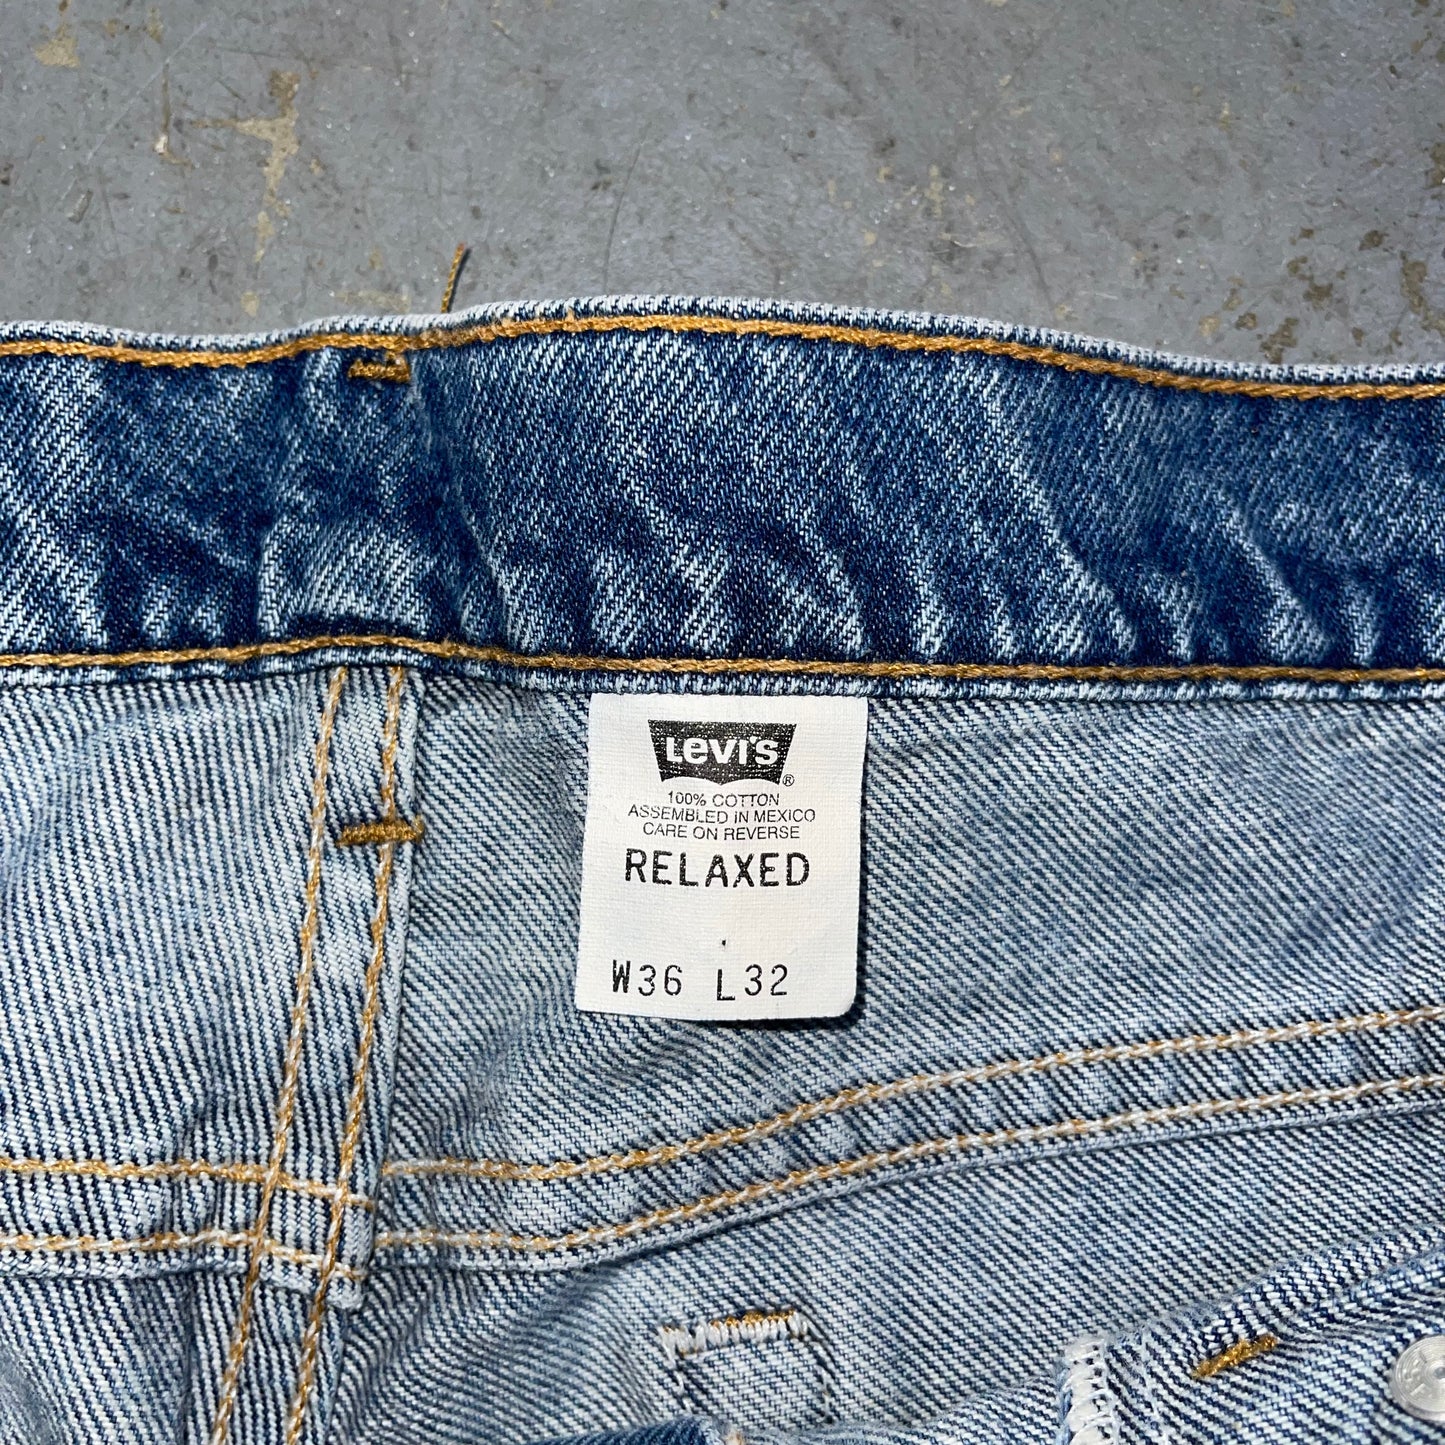 Vintage 90’s Levi’s 540 Relaxed Gold Tab Jeans. Size 36 x 32